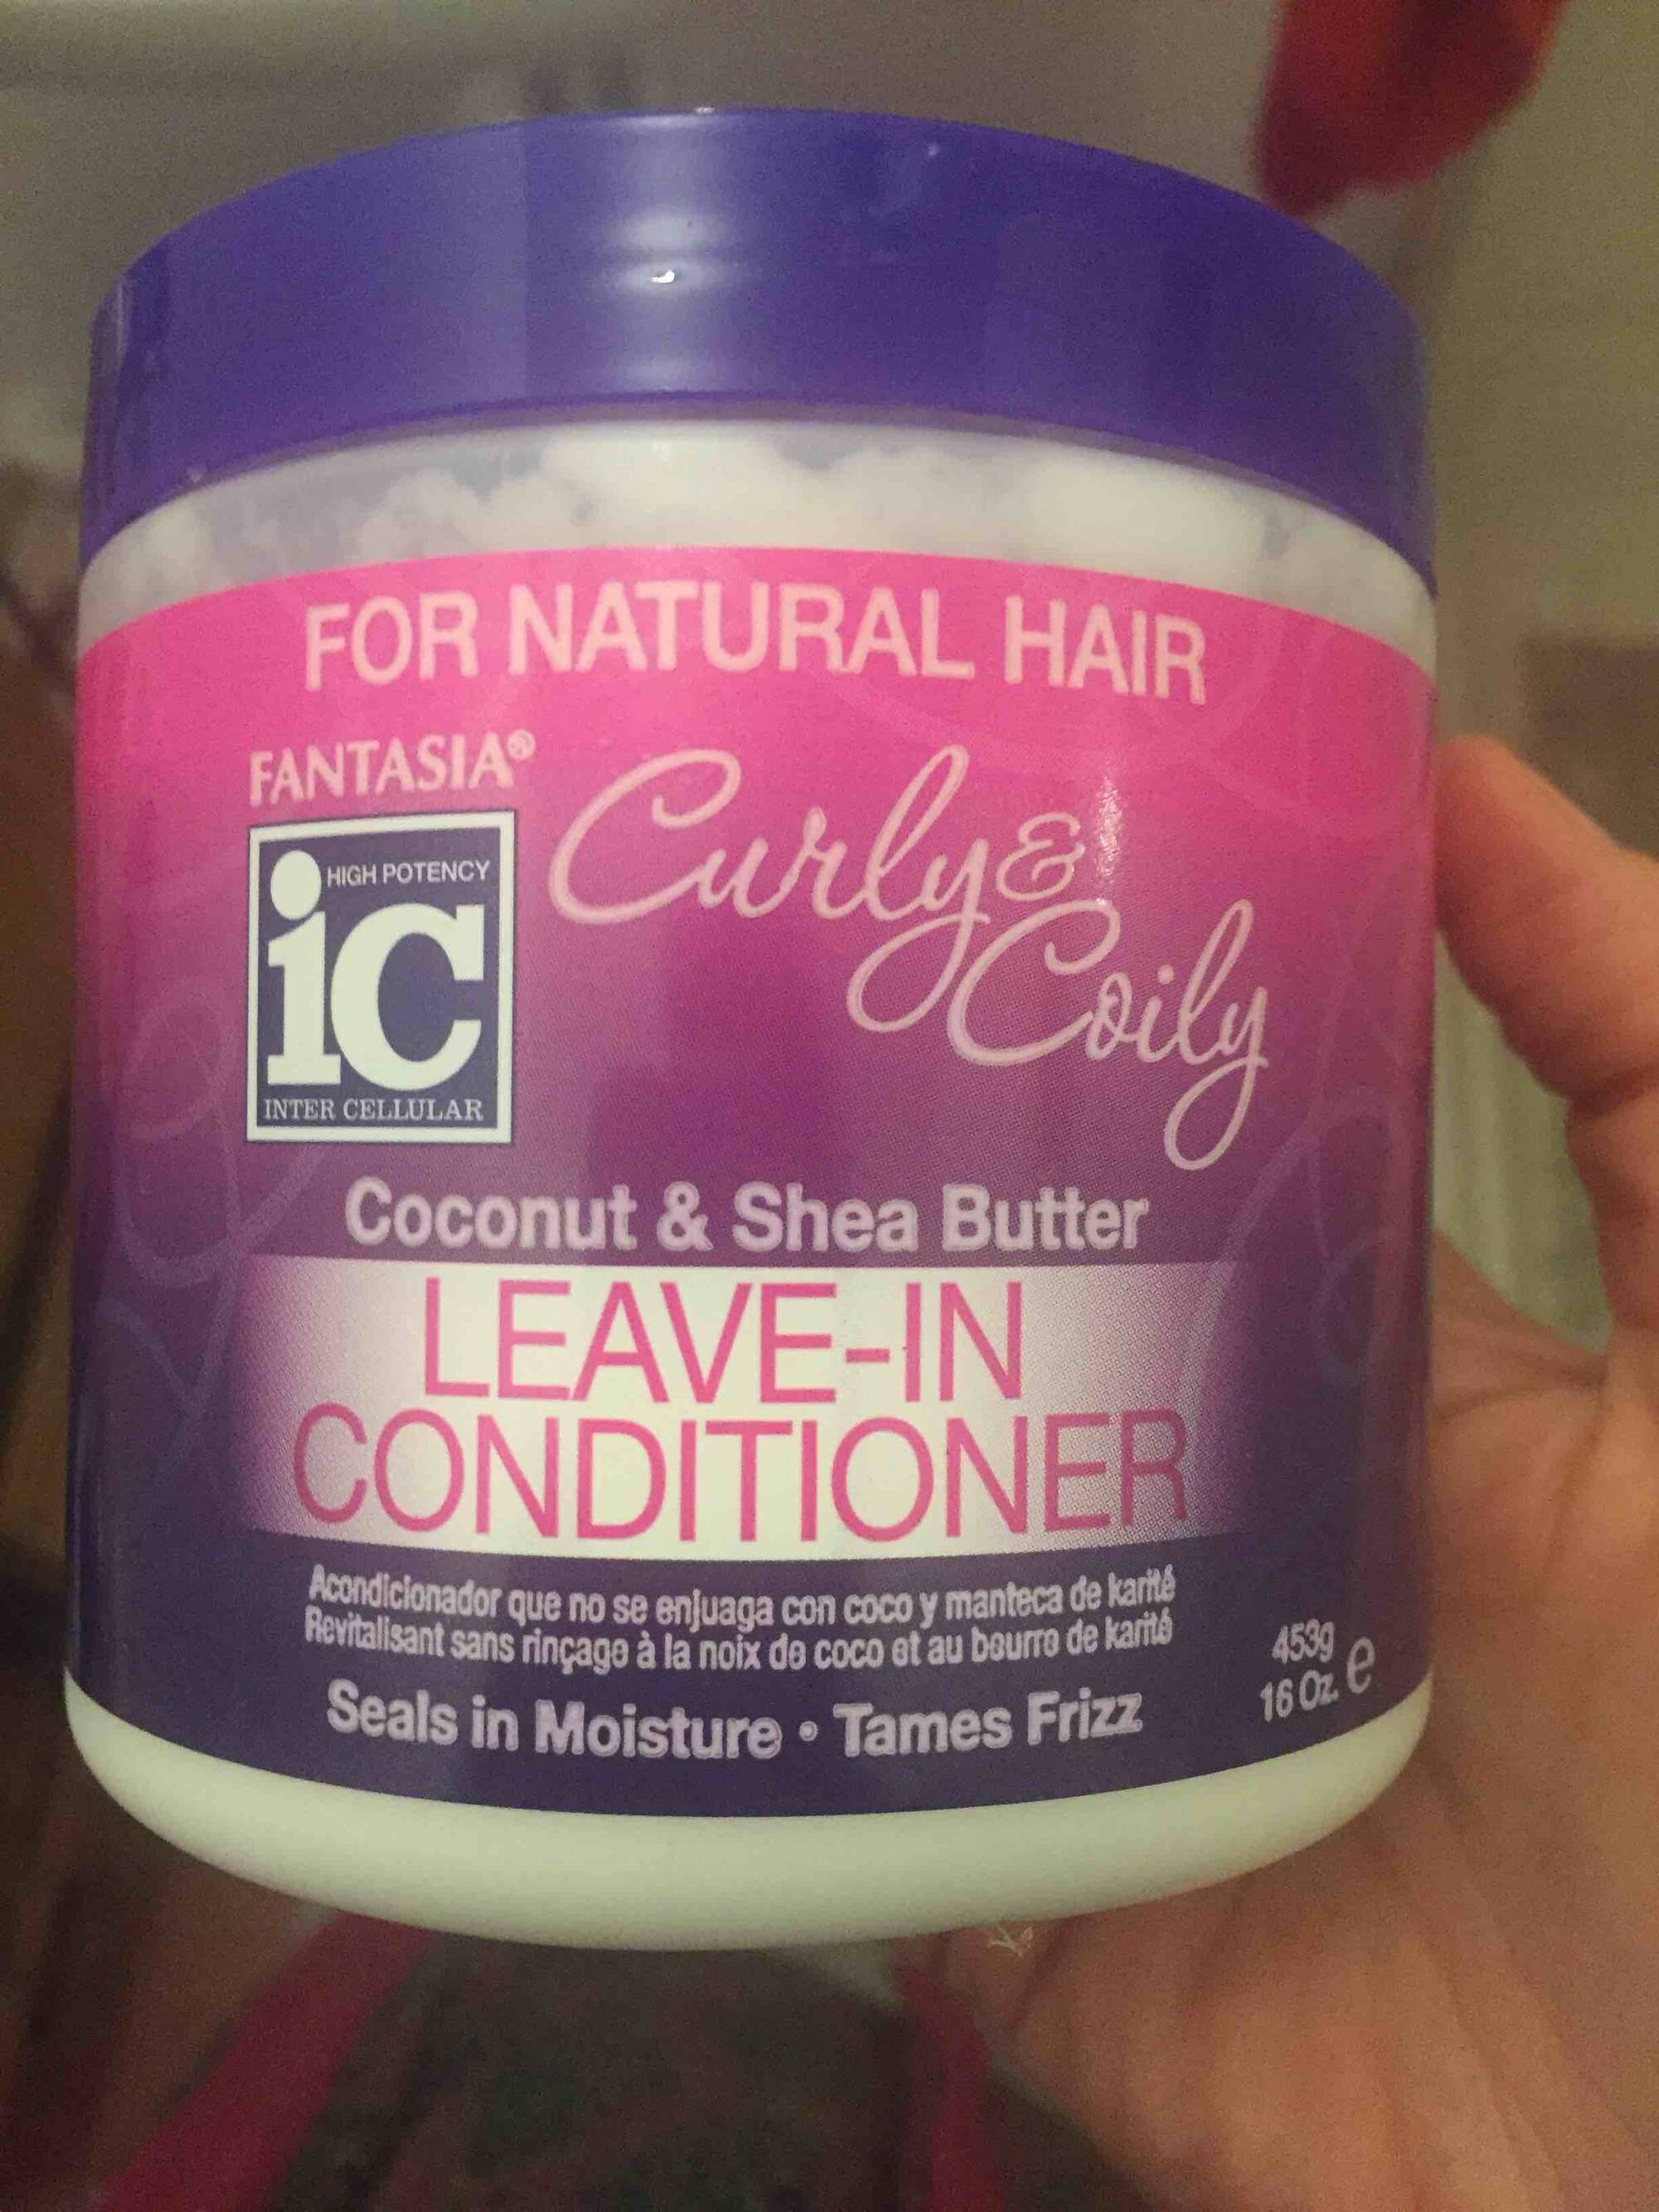 FANTASIA - Curly & coily - Leave-in conditioner